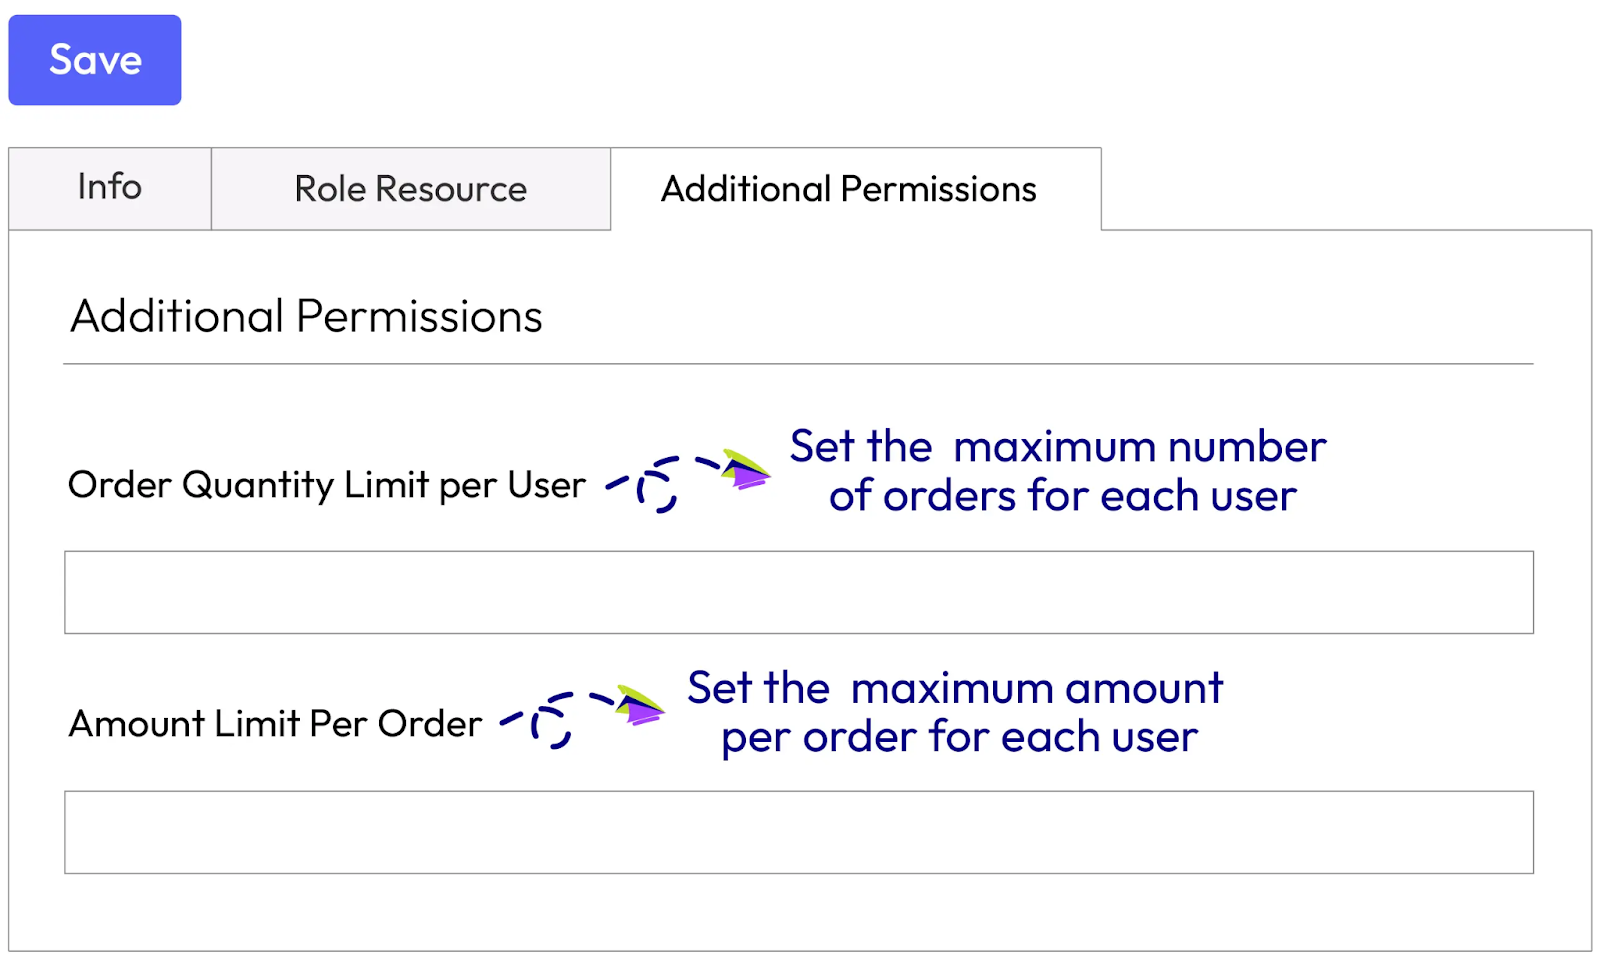 Set maximum number of orders and amount per order